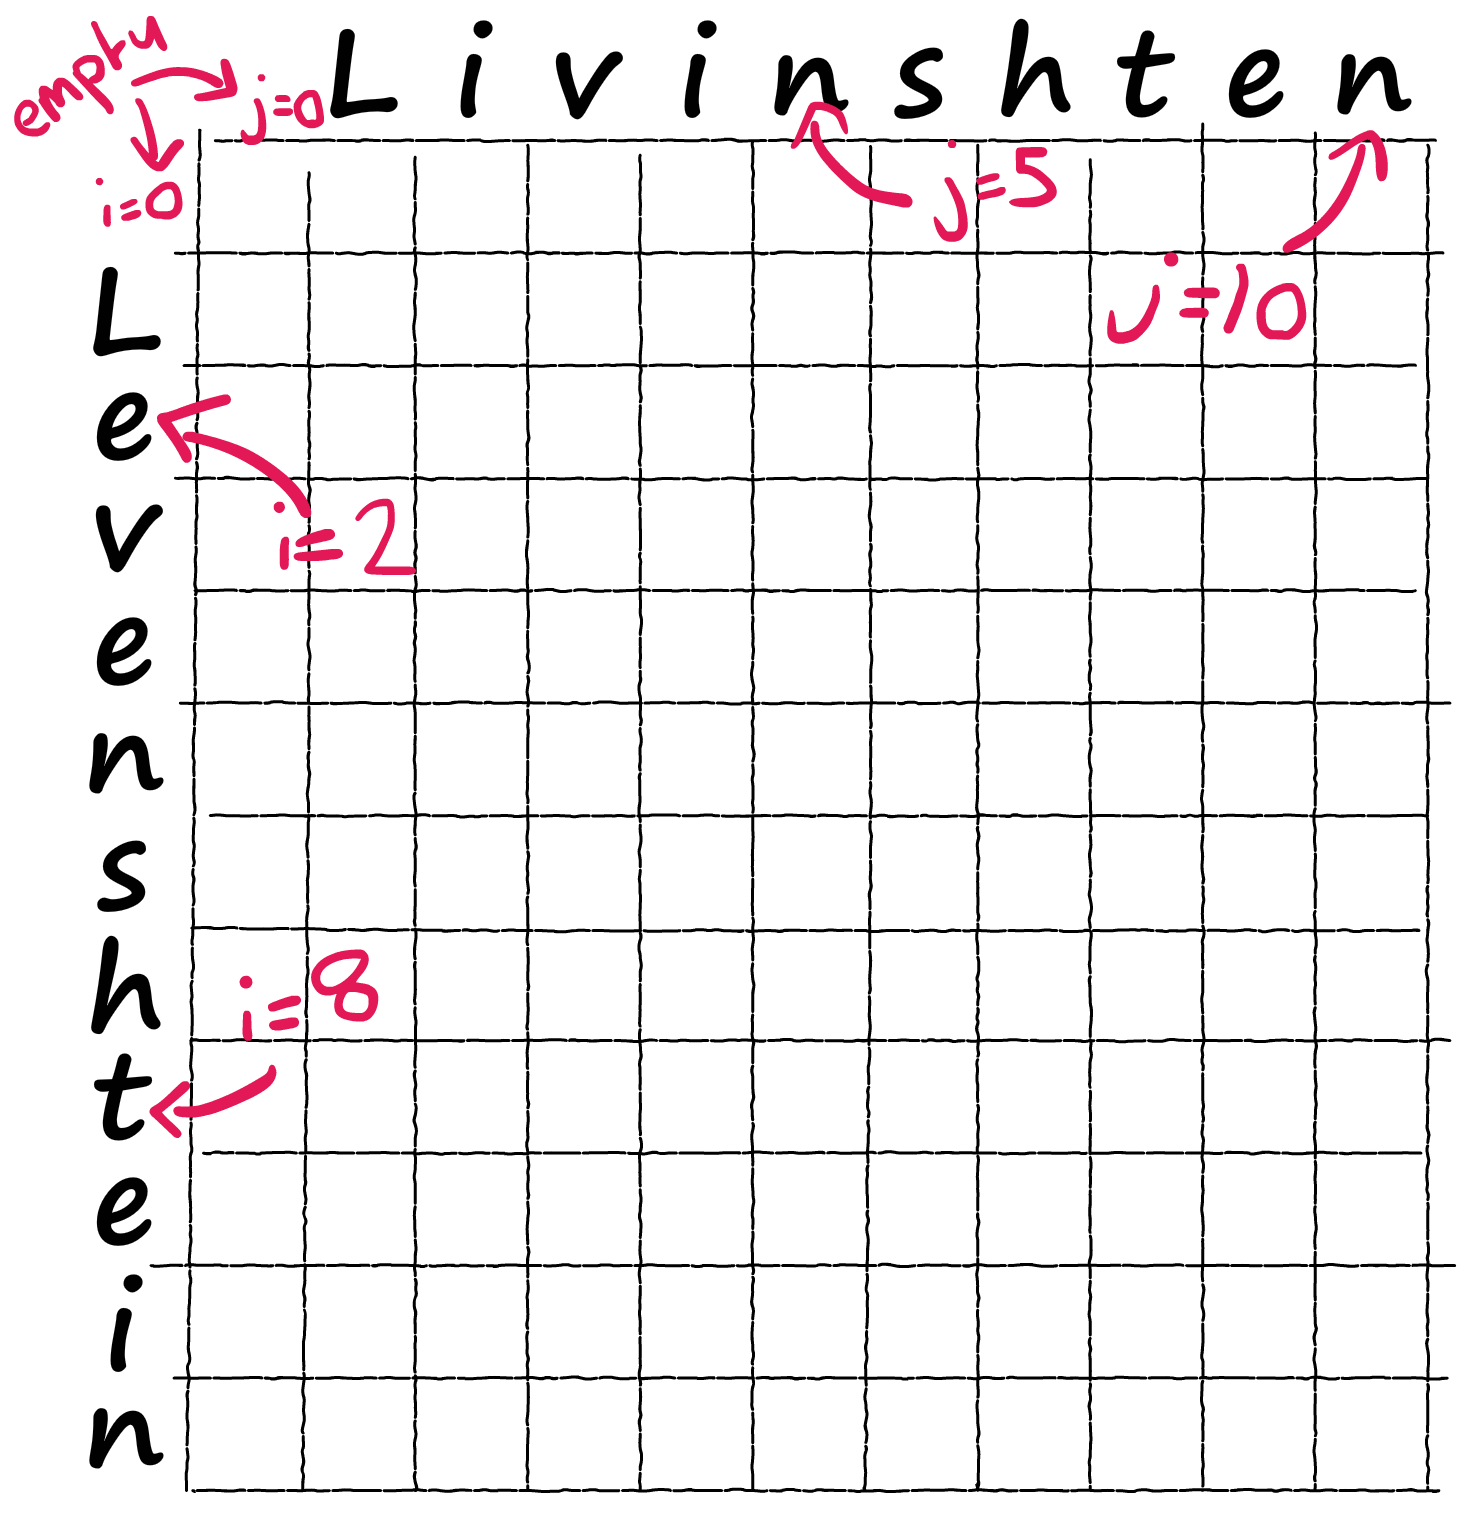 Our empty Wagner-Fischer matrix — we’ll be using this to calculate the Levenshtein distance between ‘Levenshtein’ and ‘Livinshten’.